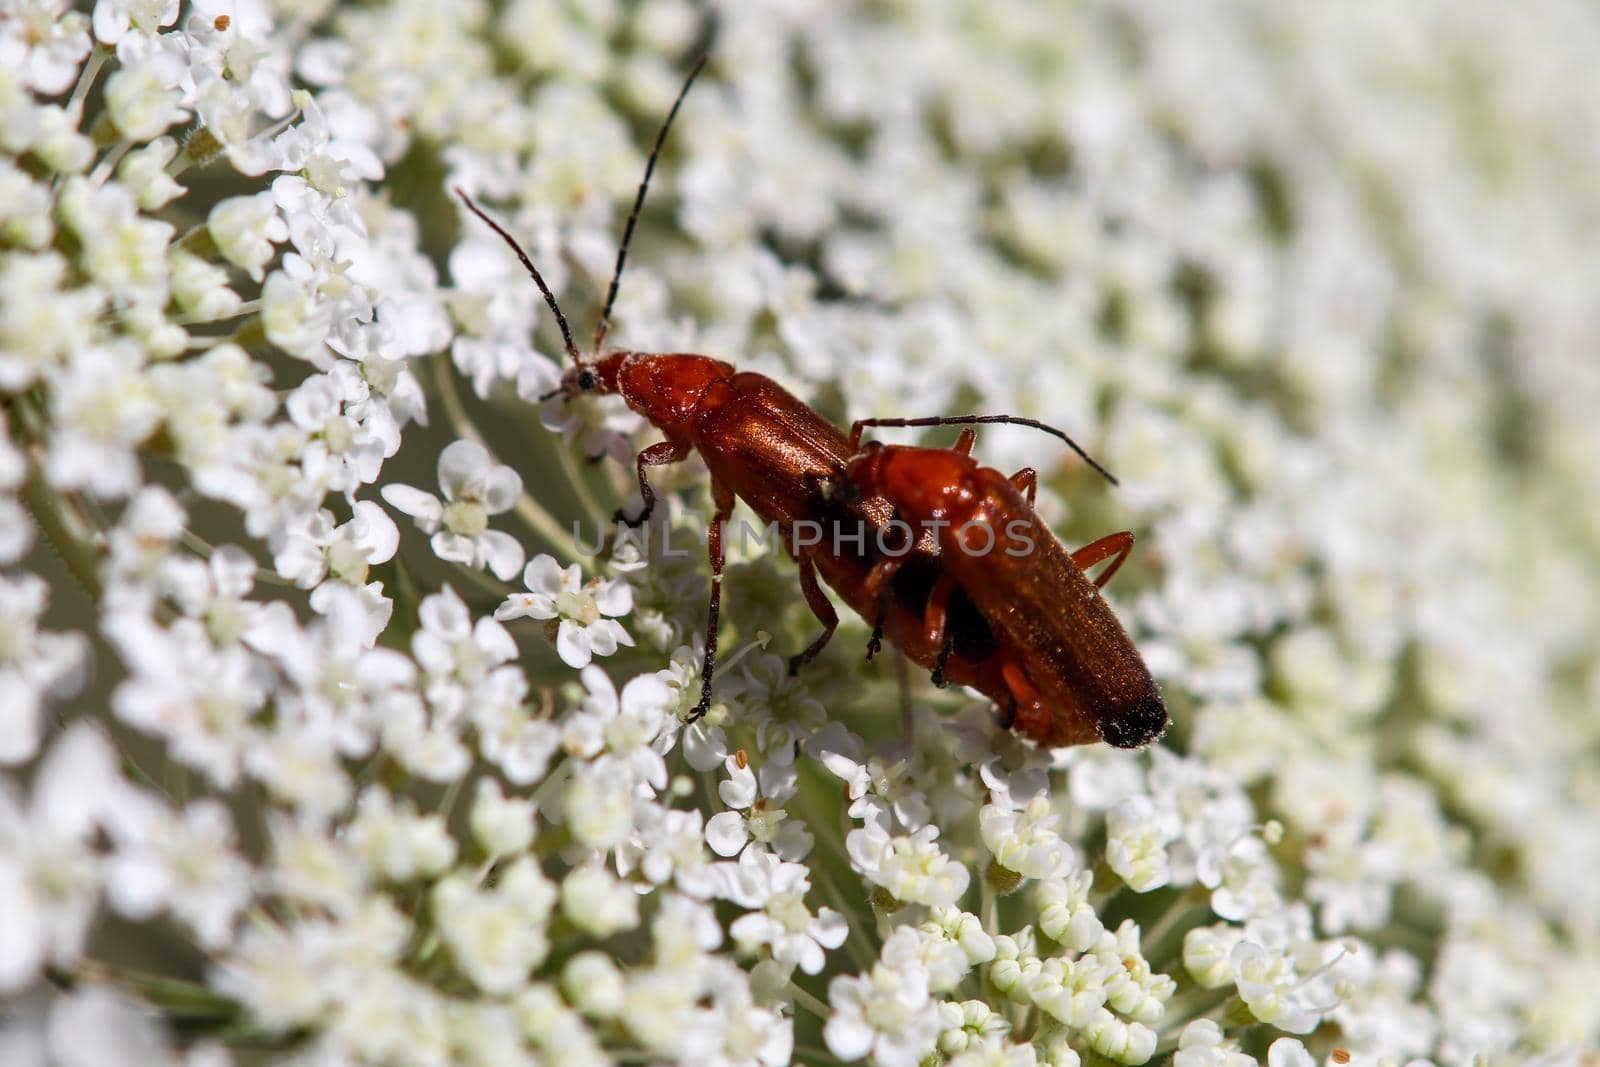 Black-tipped soldier beetle when mating by reinerc